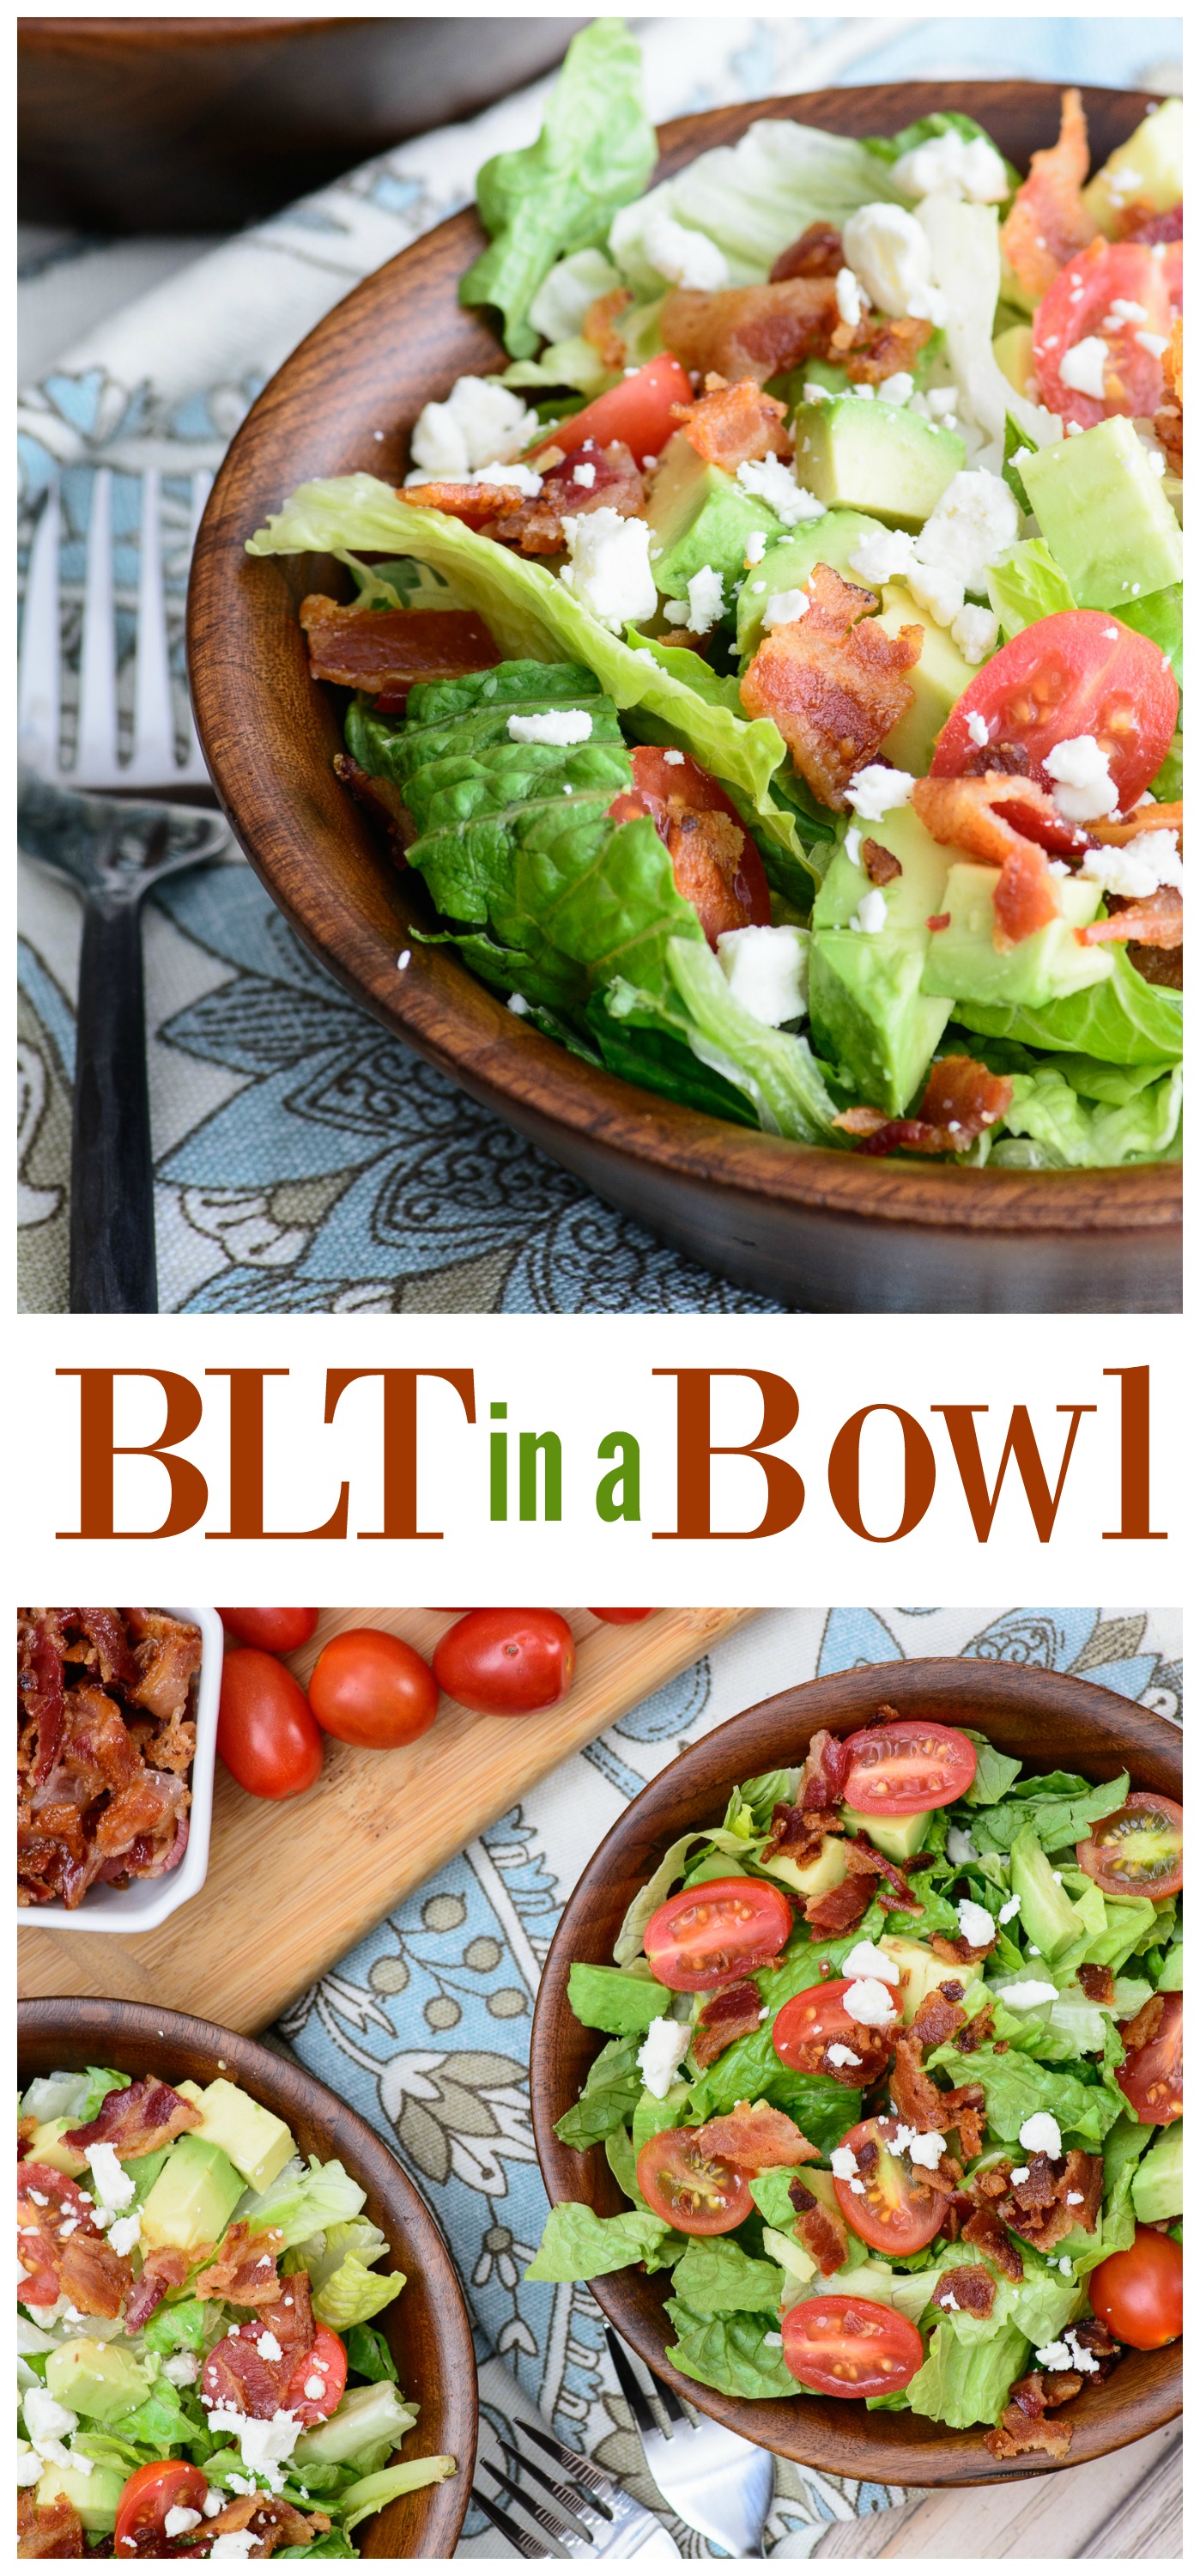 This salad recipe has all the robust flavor of a BLT without the carbs! This paleo, gluten free and low-carb recipe is so delicious, you won't even miss the bread!